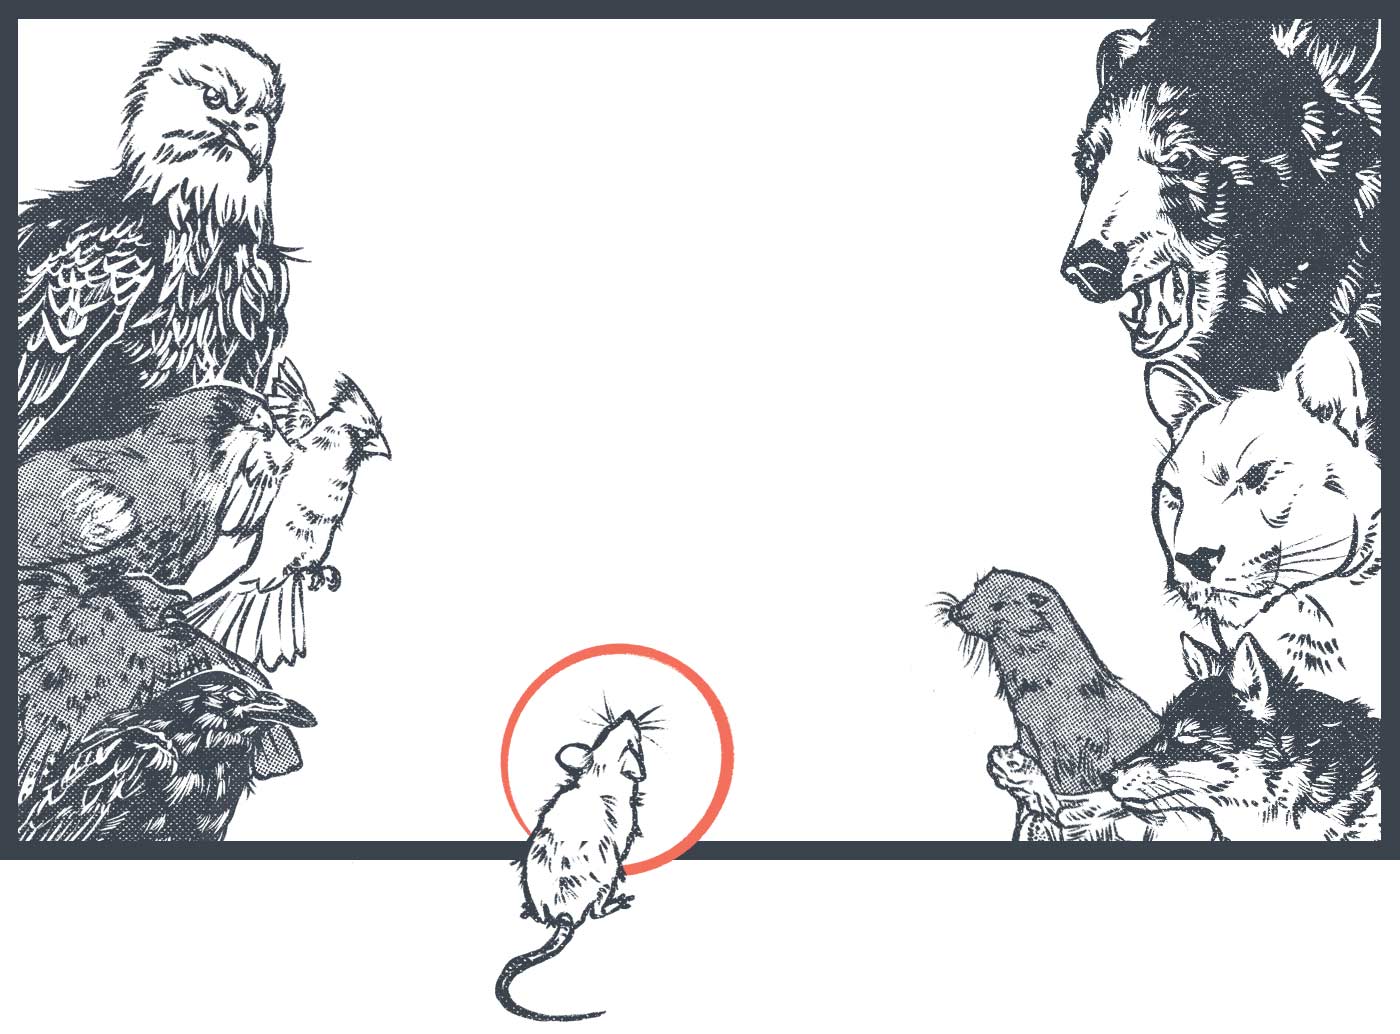 On either side of the illustration are a variety of animals. On the left is an eagle, a hawk, a cardinal, a raven, and a blue jay. They are facing a bear, a cougar, an otter, a fox and a tortoise on the left side. In the middle is a little mouse.